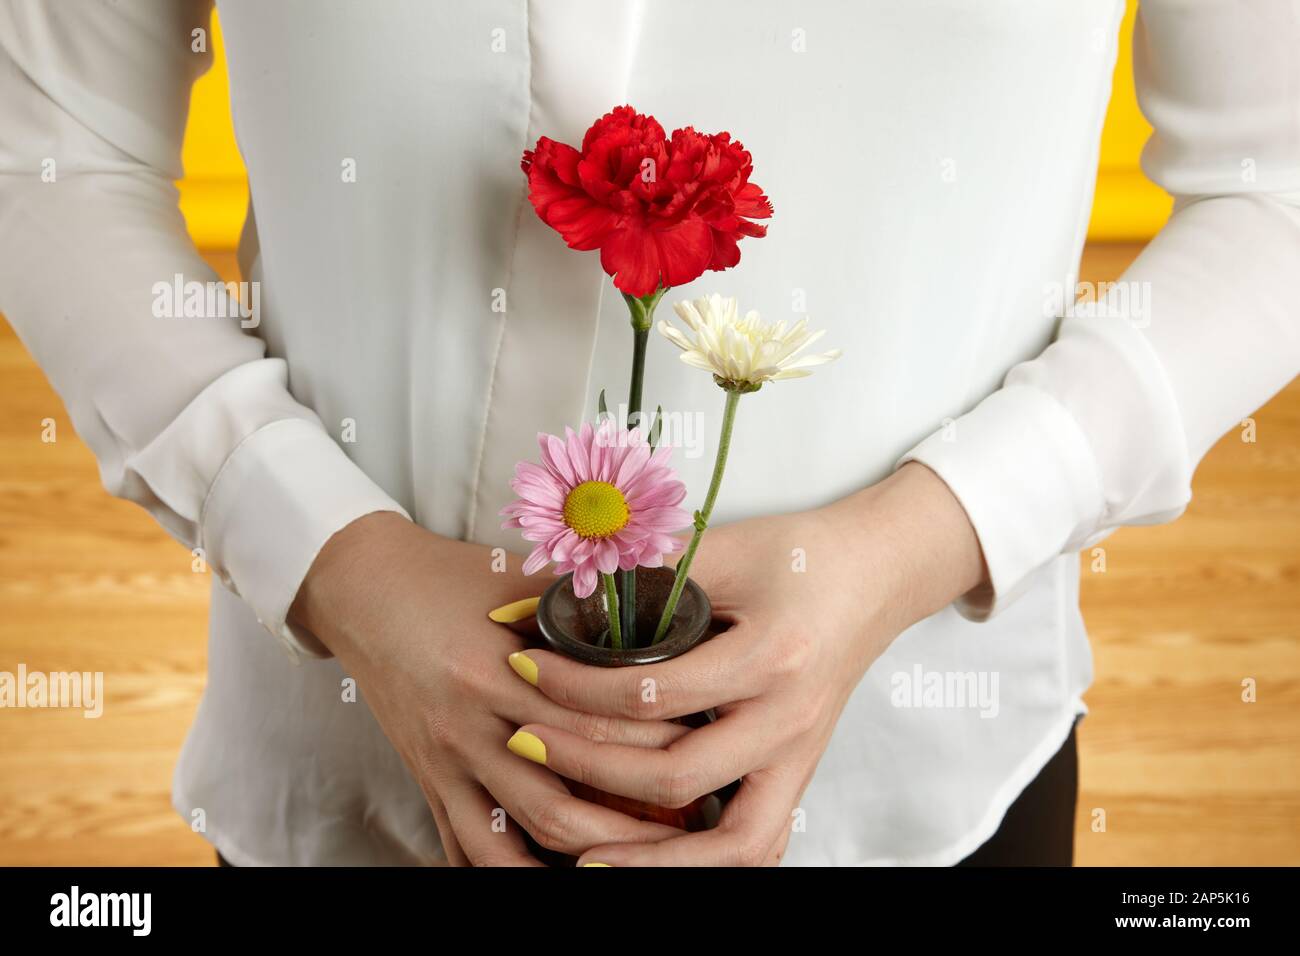 Hand with vase of flowers Stock Photo